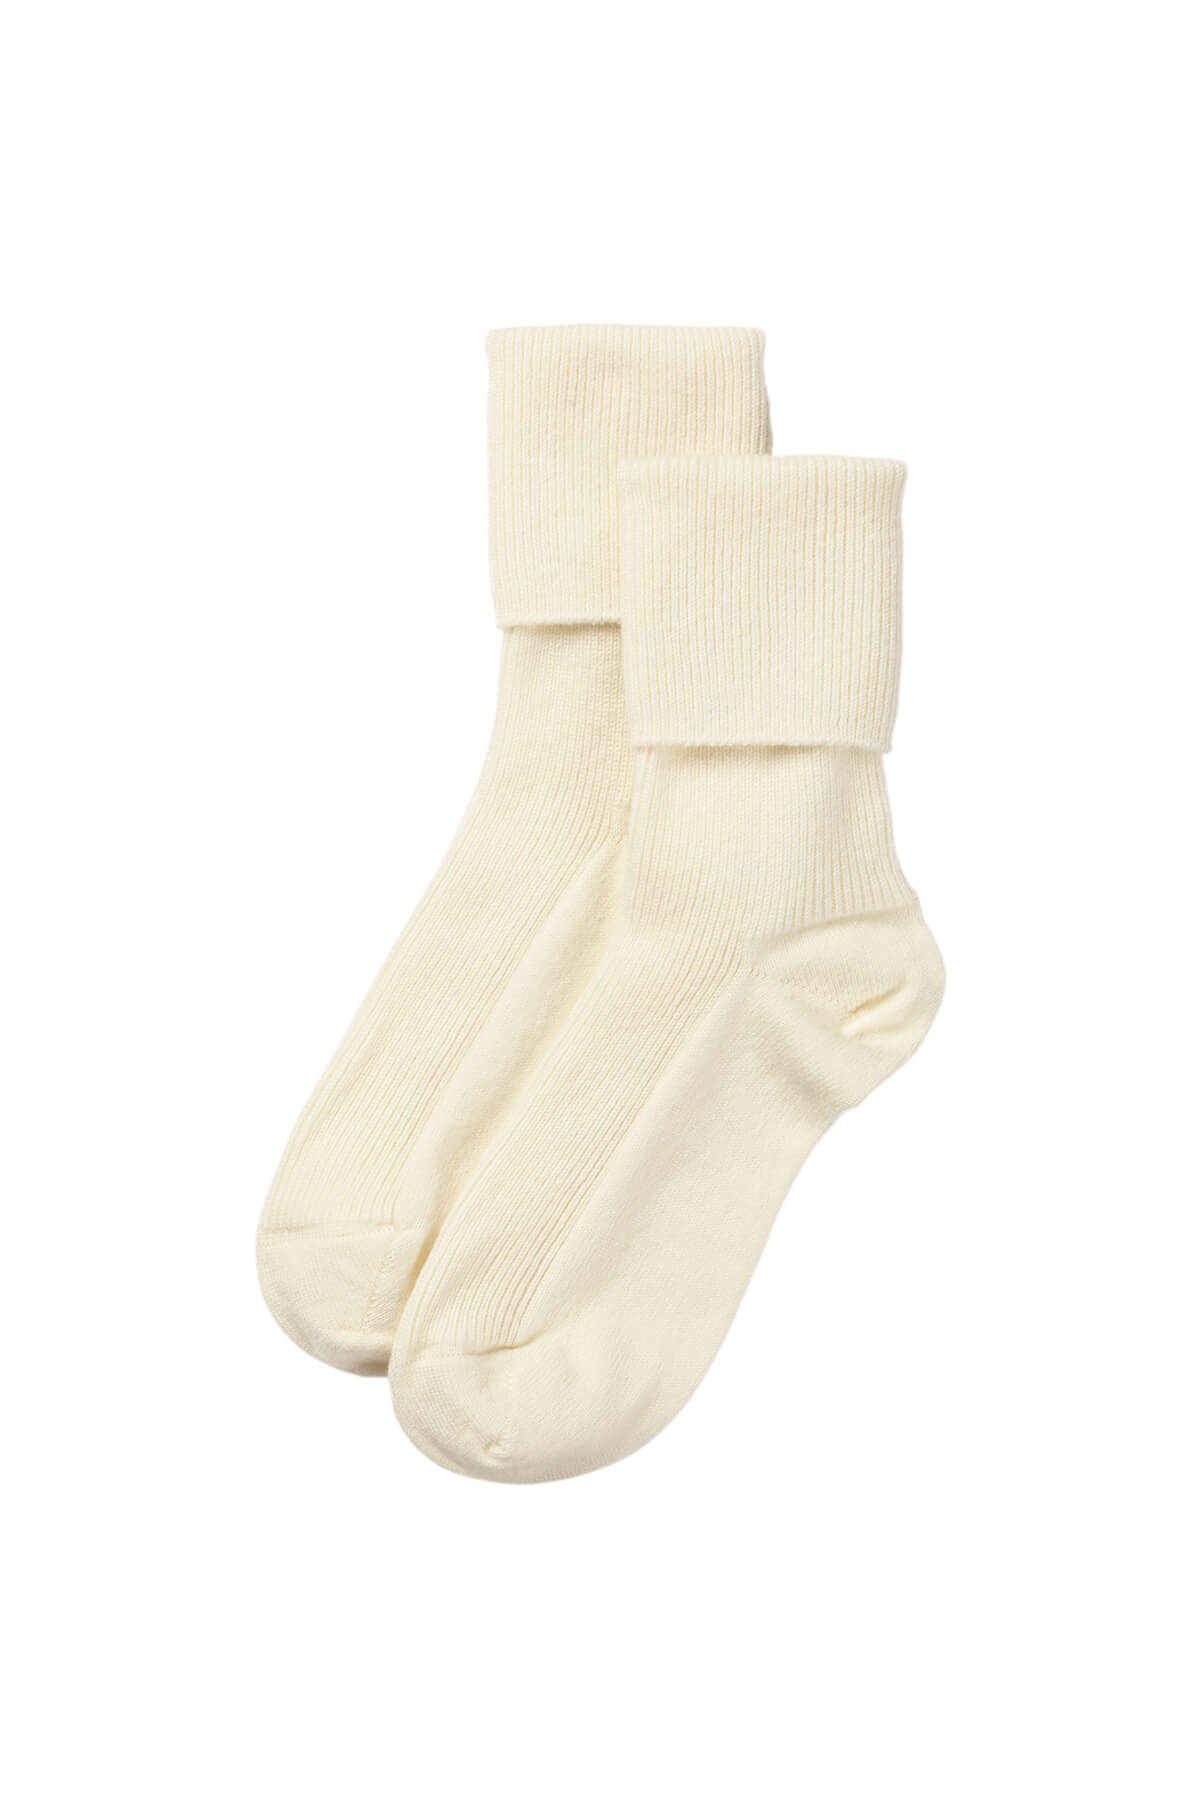 Johnstons of Elgin Gift Set includes 3 pairs of Women's Cashmere Socks in Ecru on a white background 365GIFTSET1C